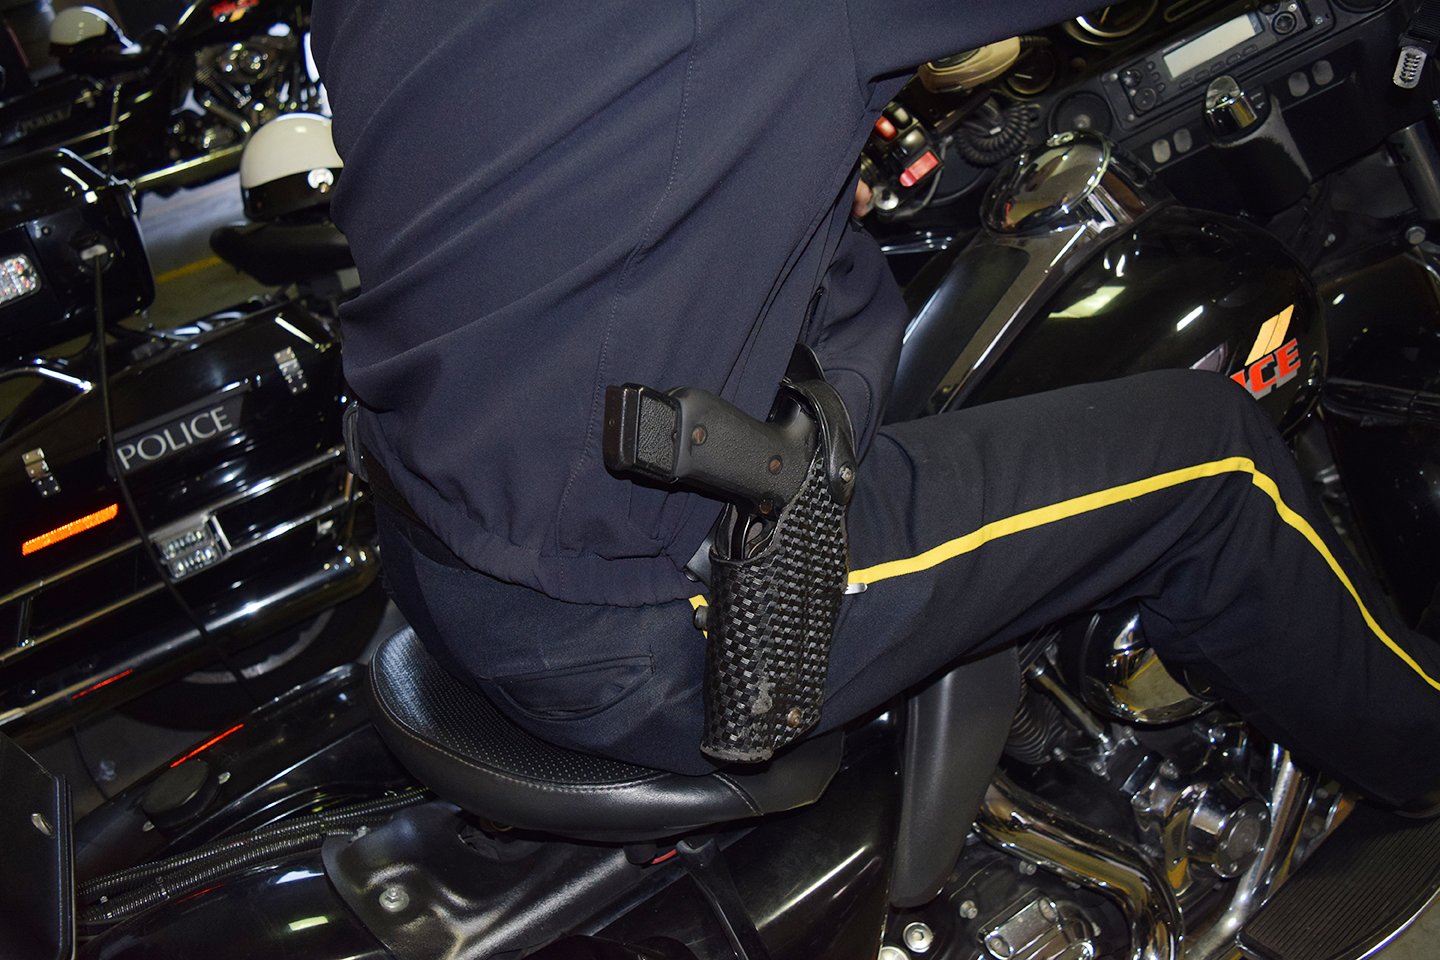 Motorcycle Concealed Carry: Going Heeled on Two Wheels - The Mag Life